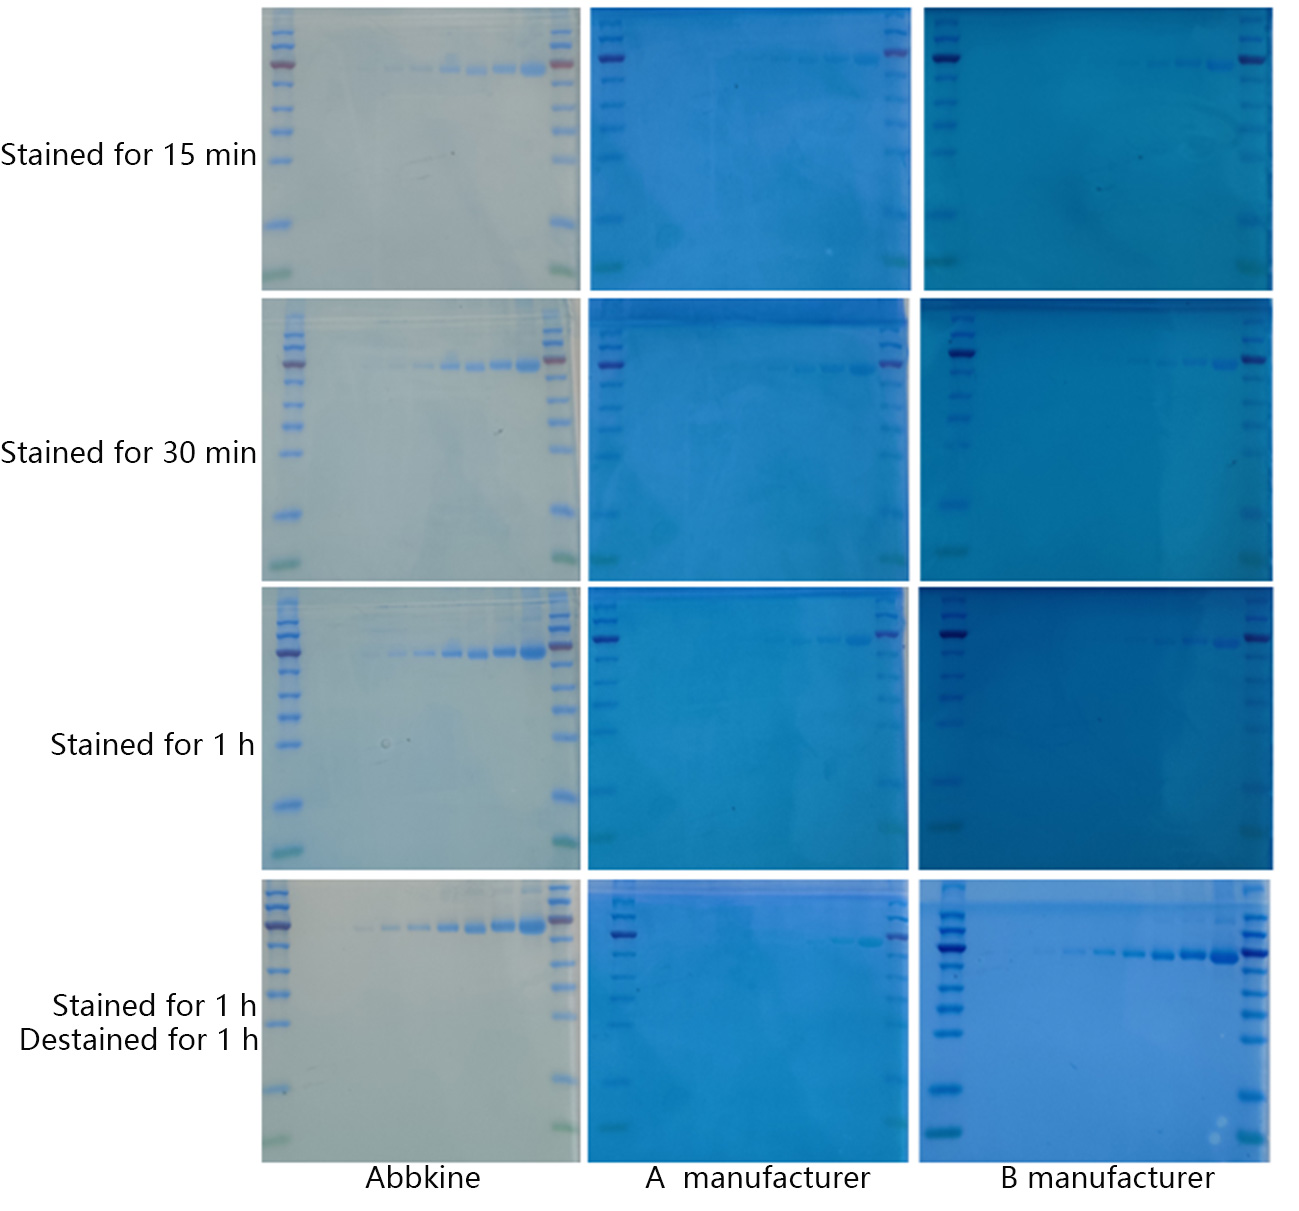 Fig.1 SuperKine™ Protein Gel Fast Staining Solution (Coomassie Blue) was used to stained BSA and compared with staining solutions from A manufcturer and B manufcturer. The sample loading are Marker, 10 ng, 20 ng, 50 ng, 100 ng, 200 ng, 500 ng, 1000 ng, 2000 ng, 5000 ng, Marker respectively. The SuperKine™ Protein Gel Fast Staining Solution (Coomassie Blue) from Abbkine showed much clearer and cleaner results, no matter they were stained for 15 min or 1 h.